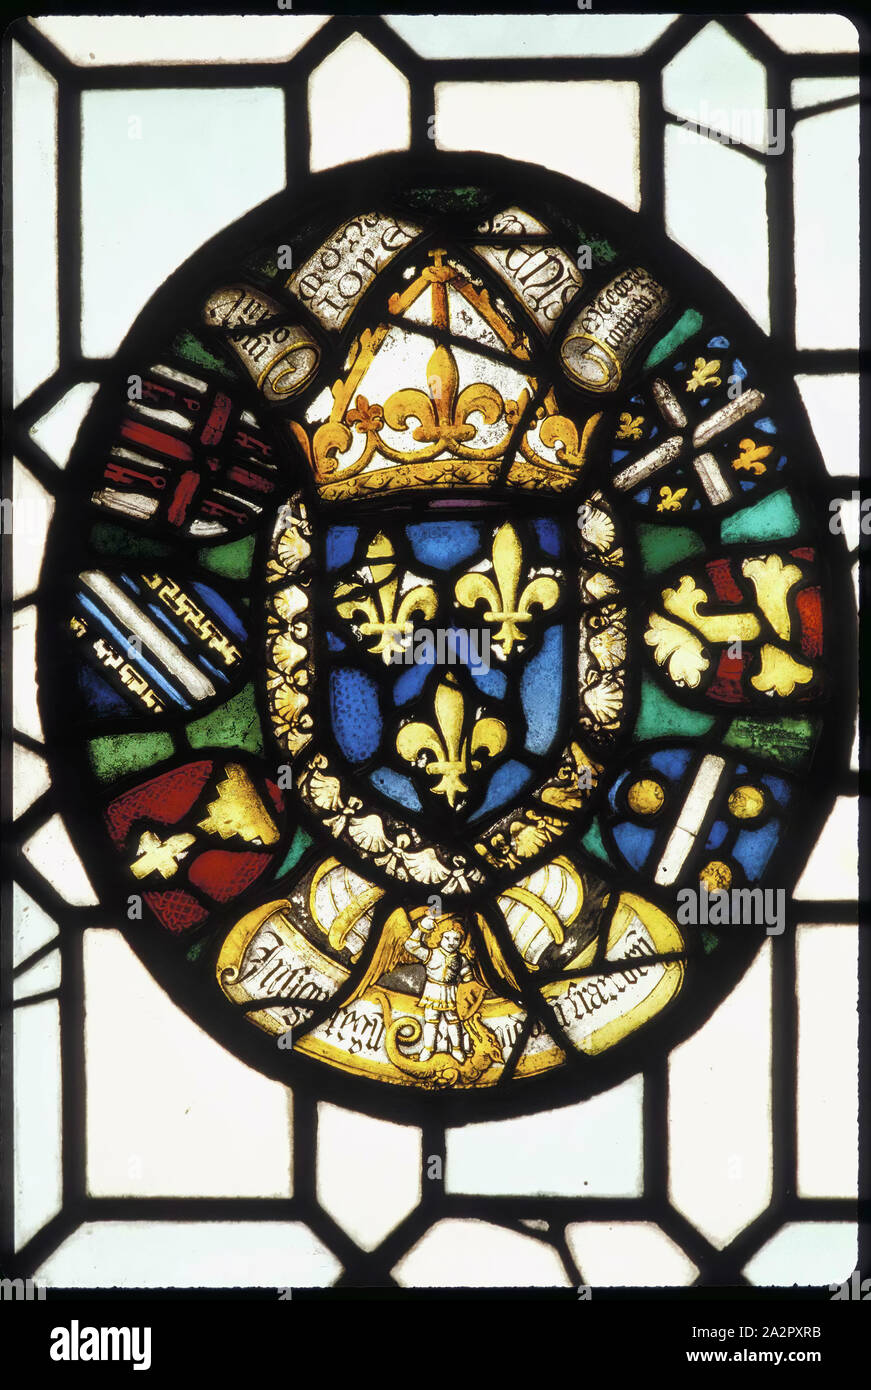 possibly Unknown (Swiss), Heraldic Panel Commemorating the Marriage of Charles VIII of France and Anne of Brittany and the Treaty of Sable, 1490, late 16th/early 17th Century, Stained glass: Pot metal; white glass with silver stain, 28 3/4 x 44 7/8 x 2 1/4 in. (73.0 x 114.0 x 5.7 cm Stock Photo